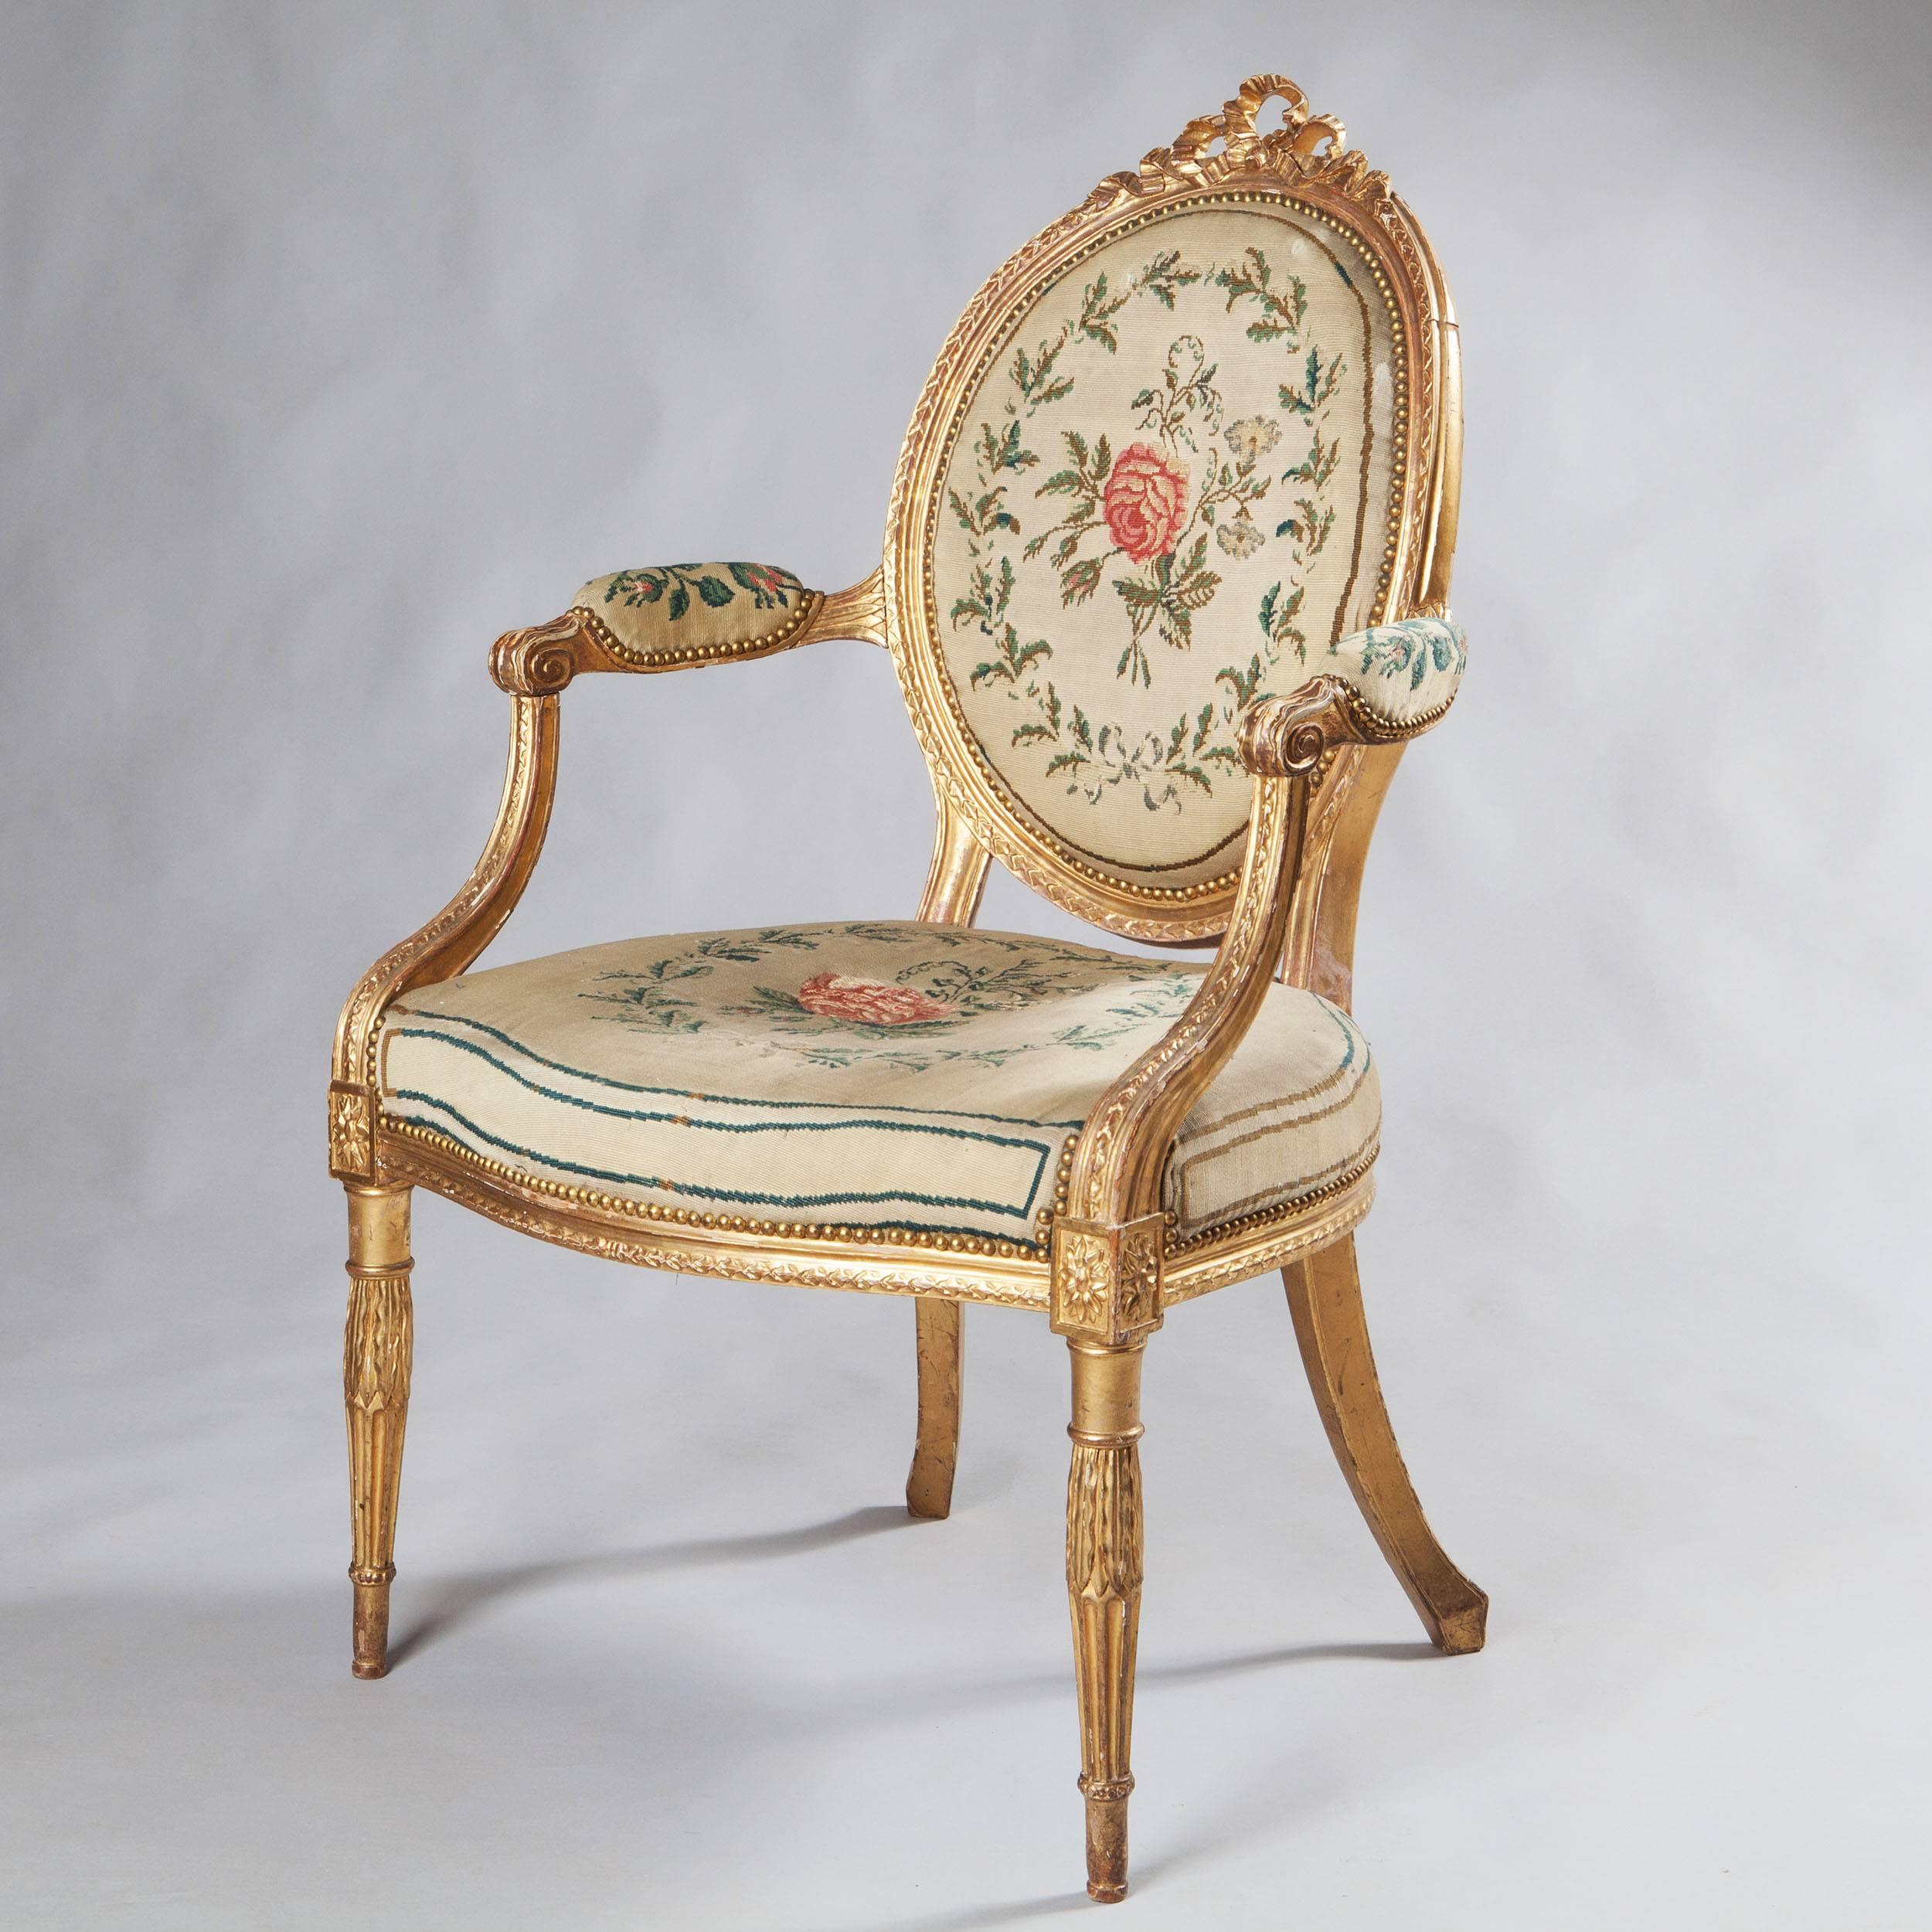 England, circa 1780.

A very fine late 18th-century suite of six armchairs and a settee, of elegant design and good proportions, the oval backs with ribbon detailing, out-swept arms and raised on tapering fluted legs. All retaining their original